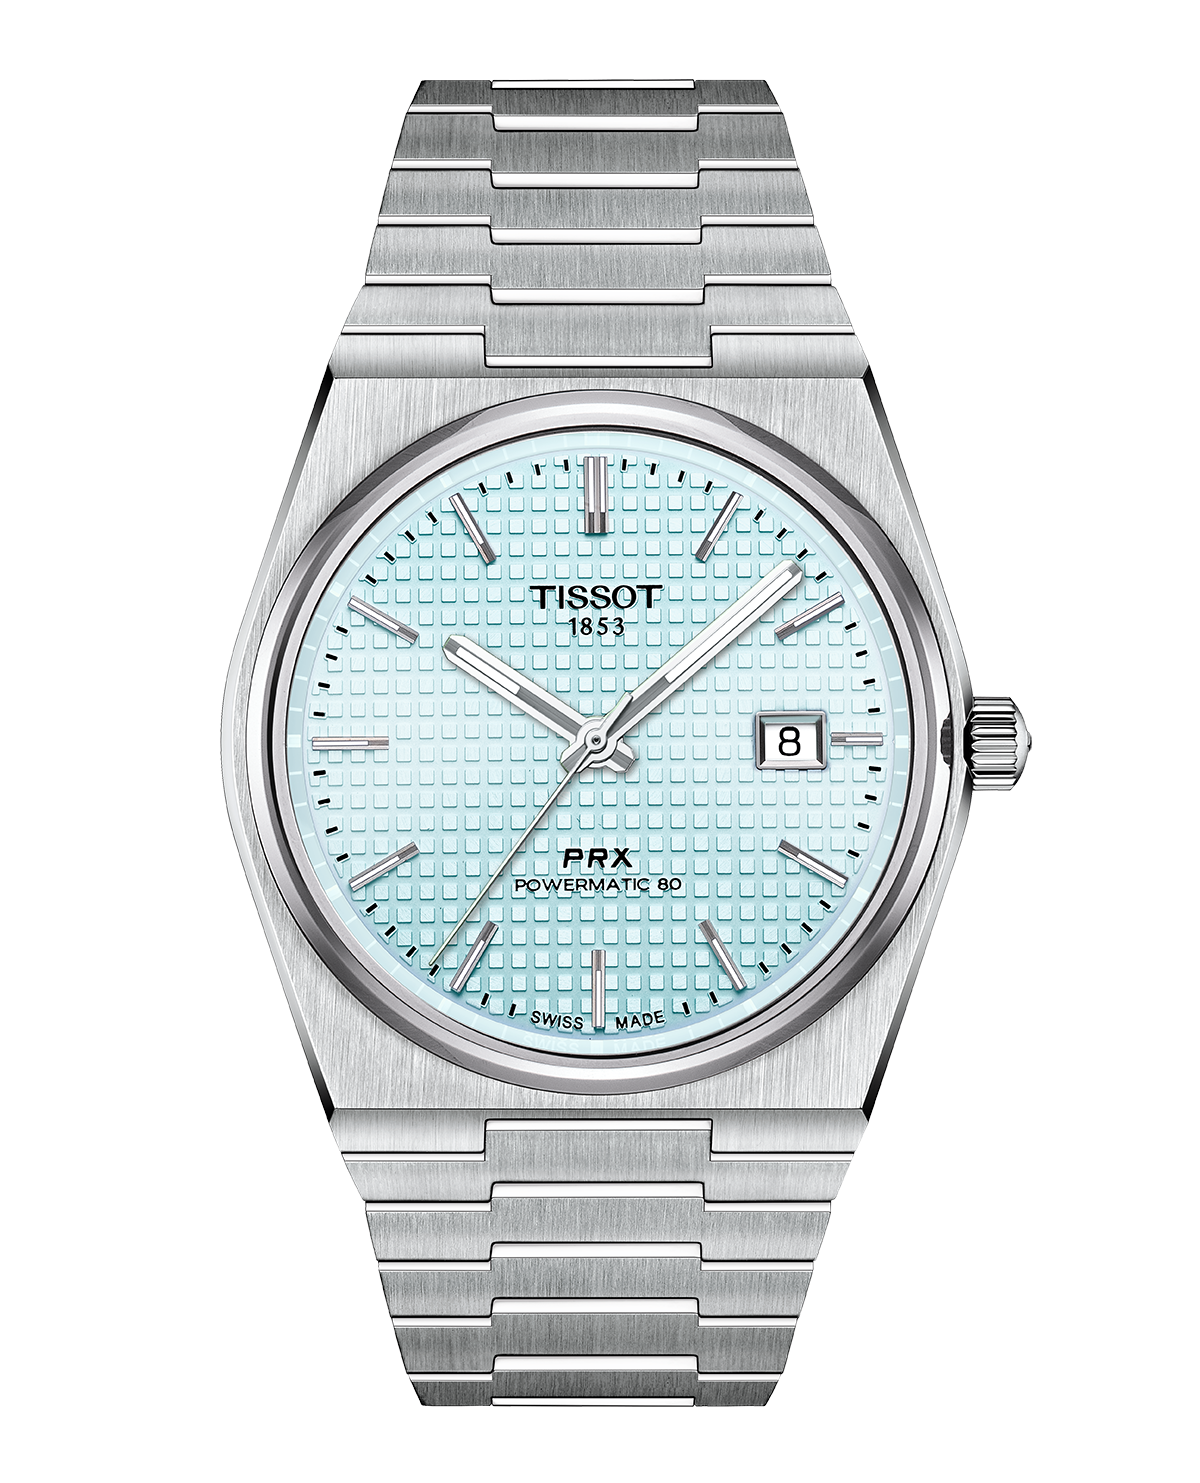 Tissot T-Touch Connect Solar Watch